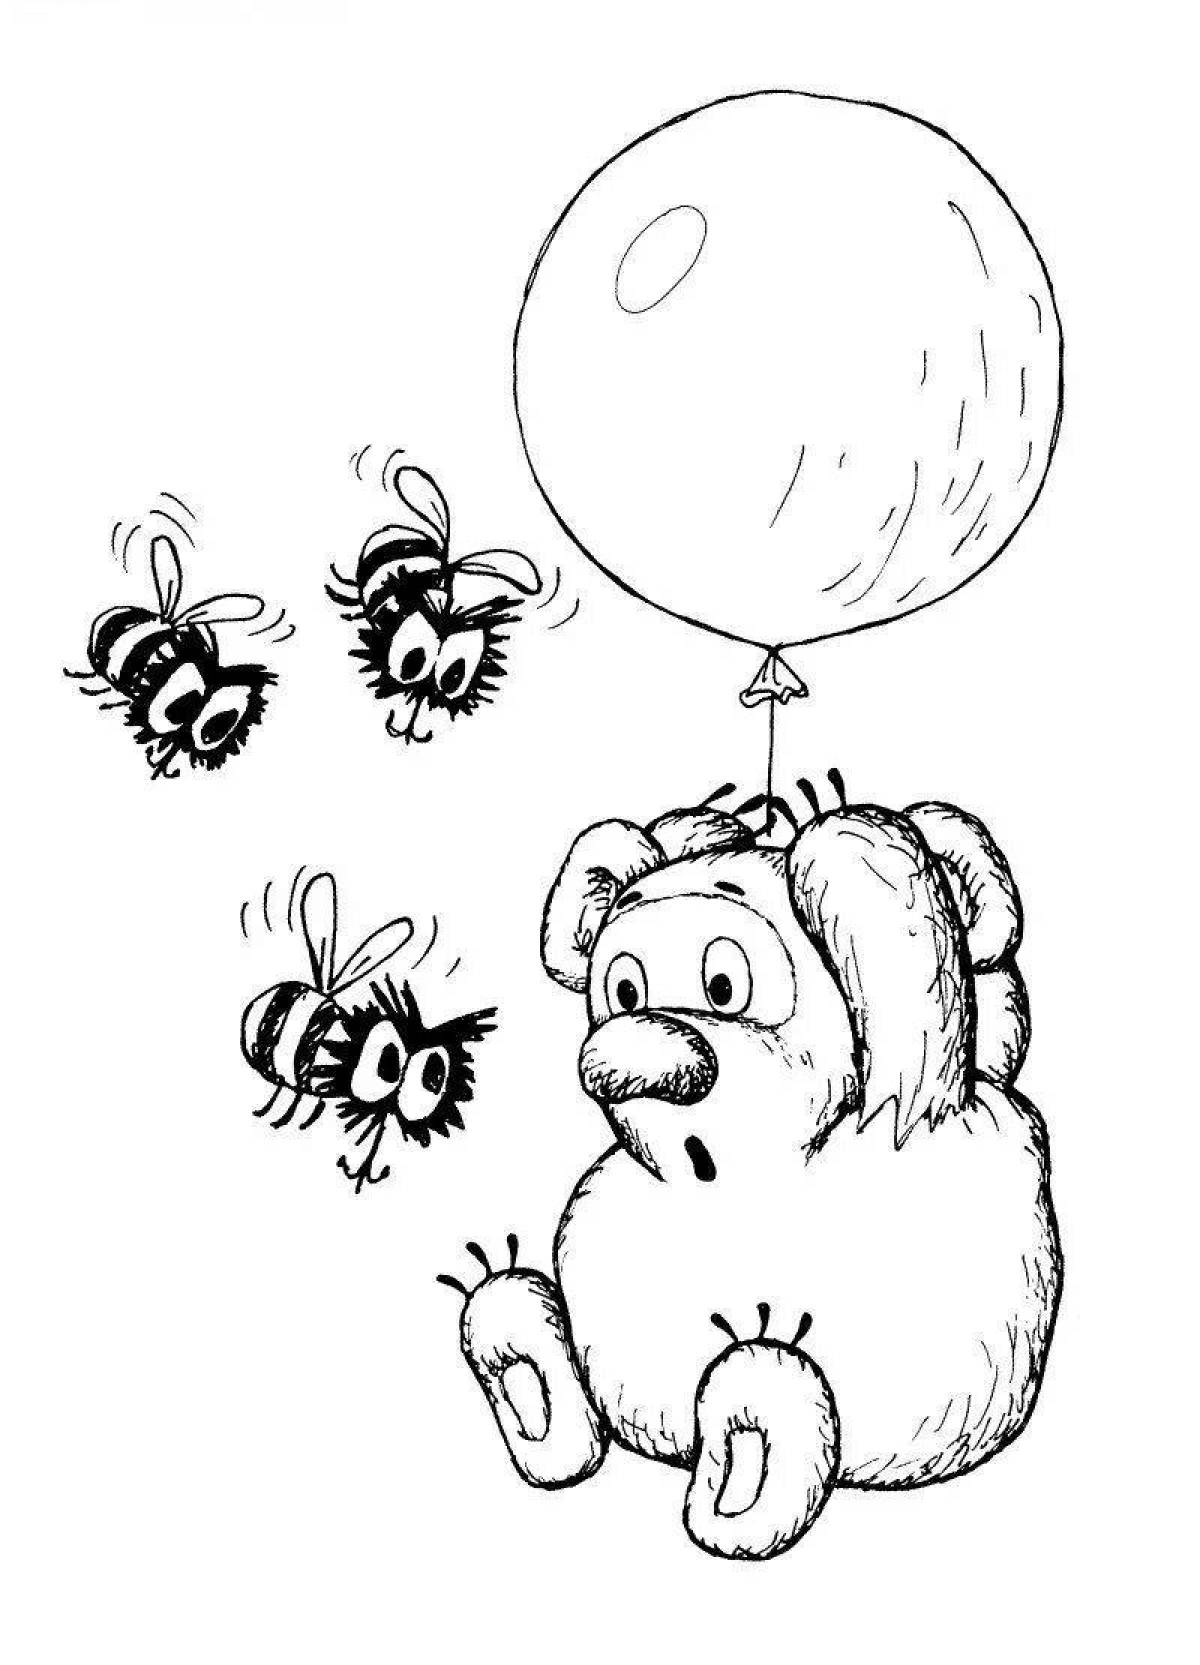 Winnie the pooh with balloon #5